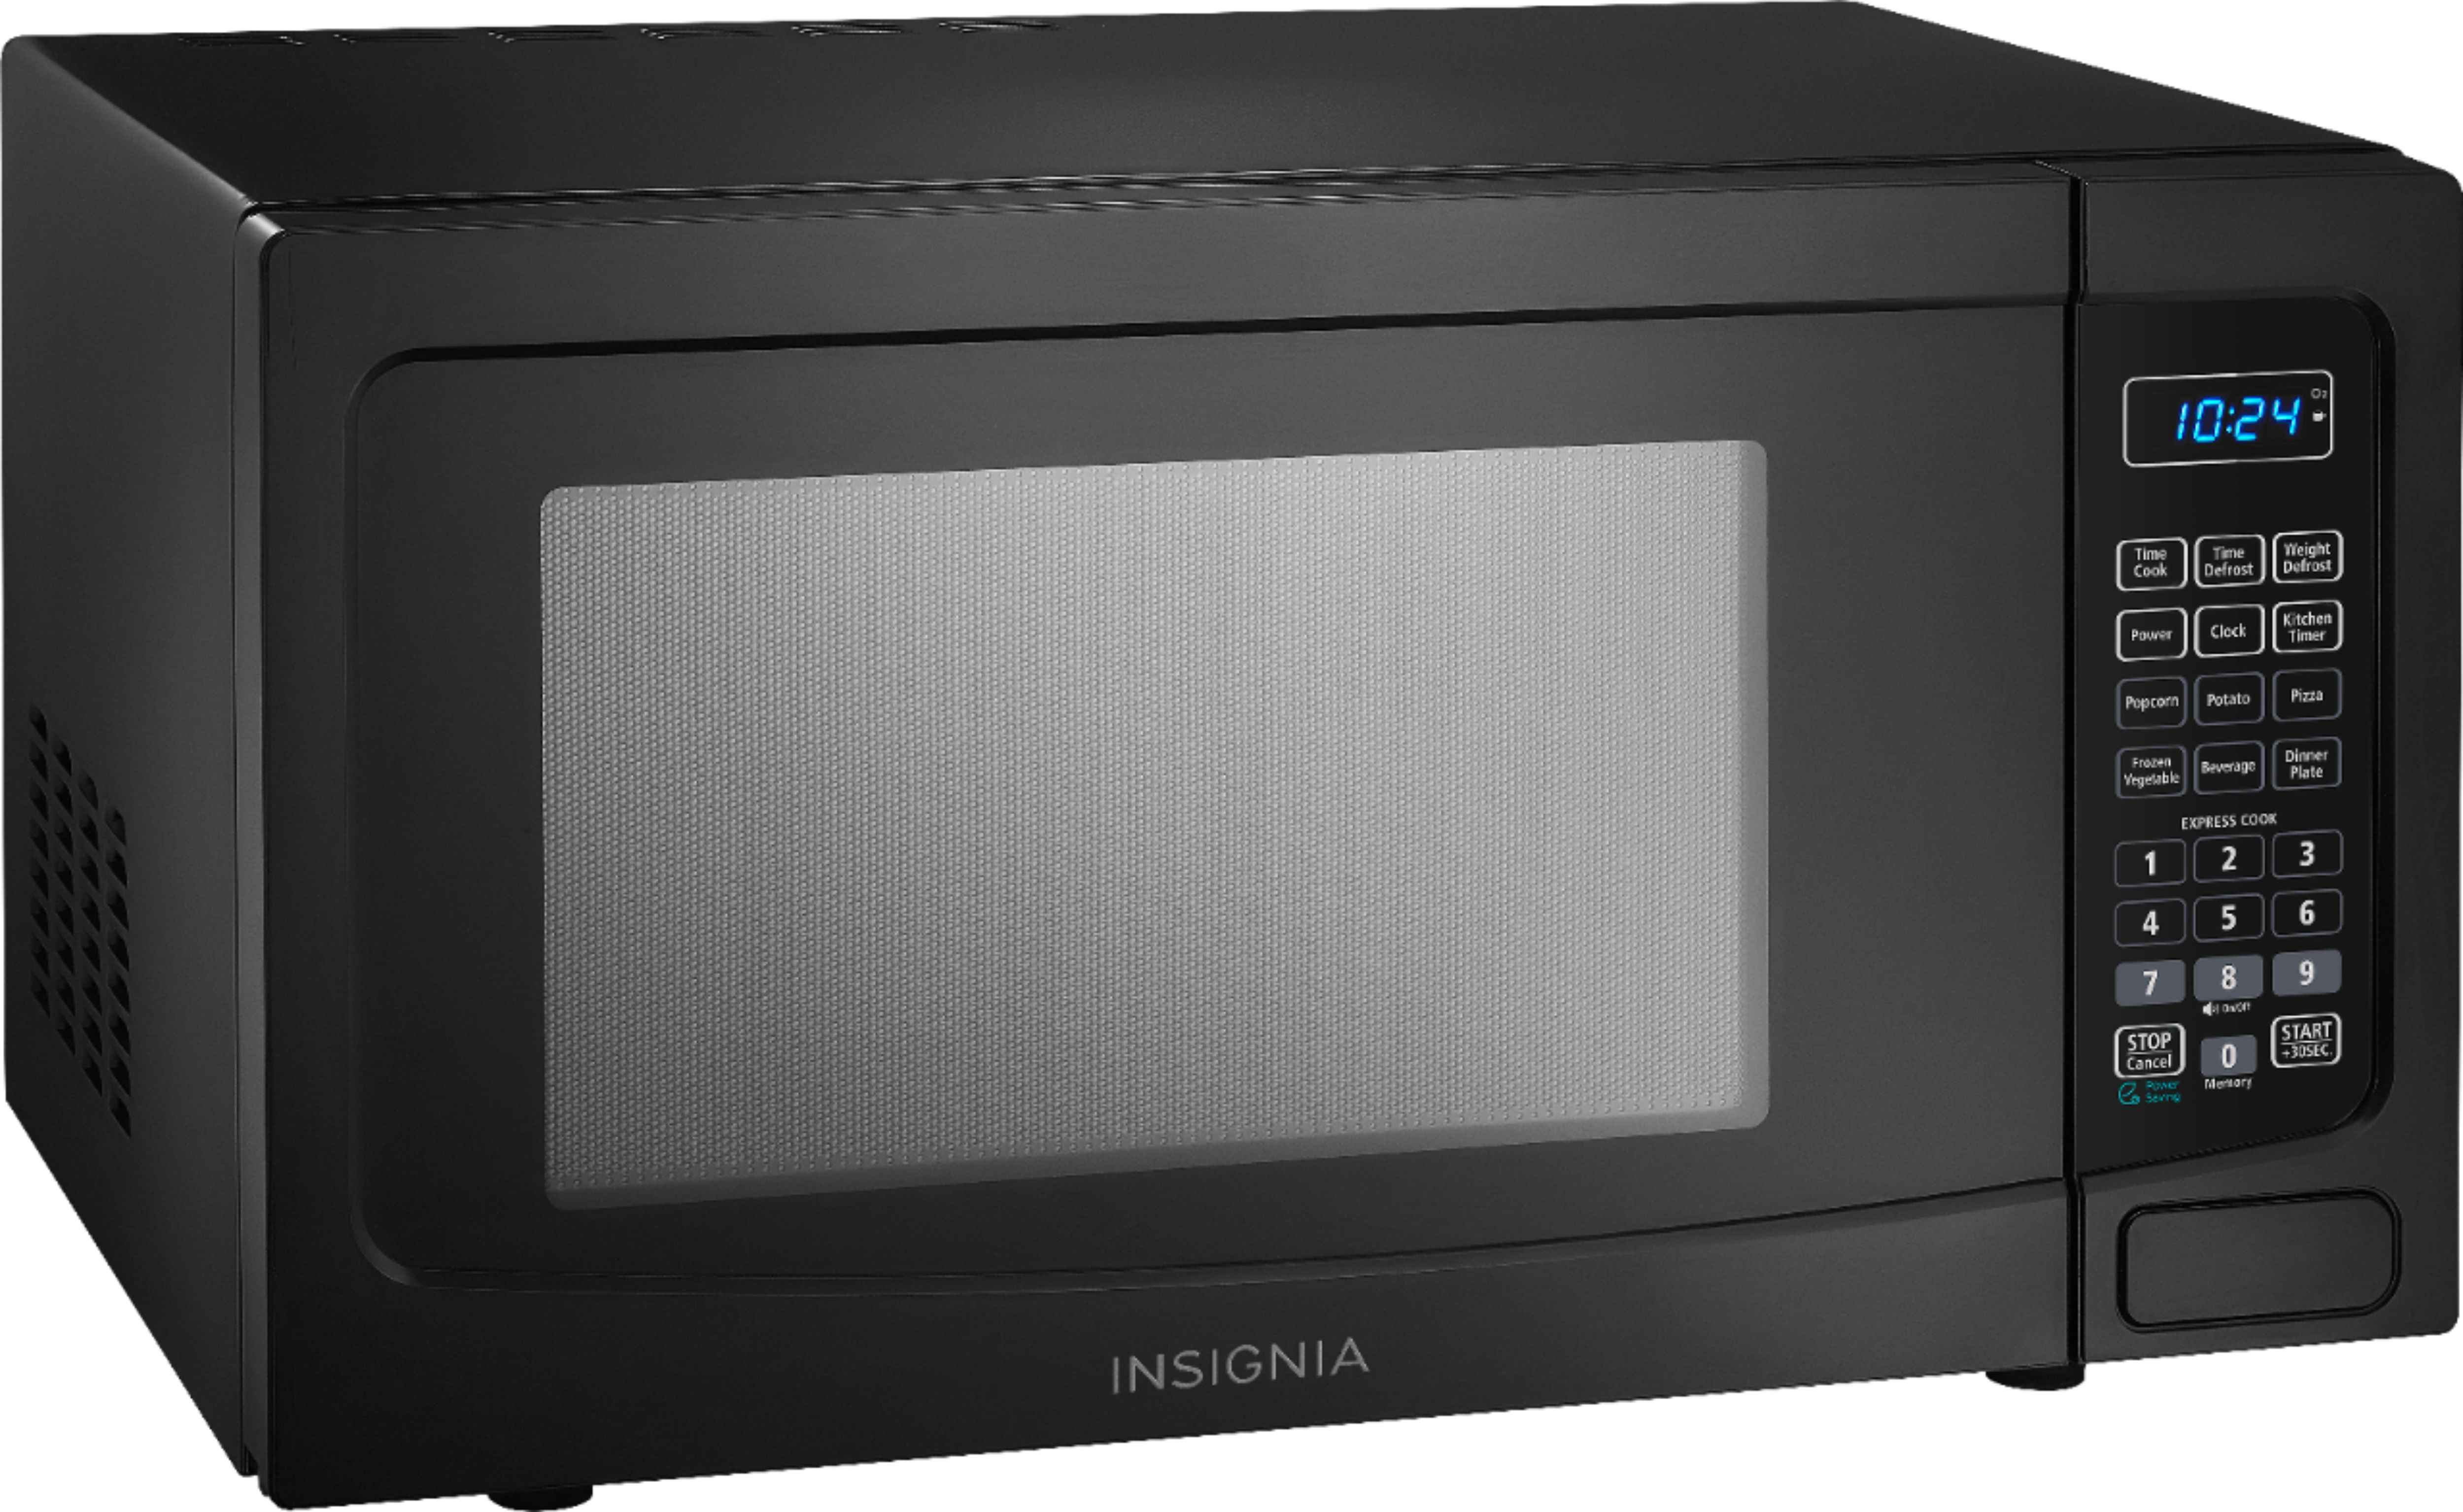 Angle View: GE - 0.9 Cu. Ft. Microwave - Stainless steel